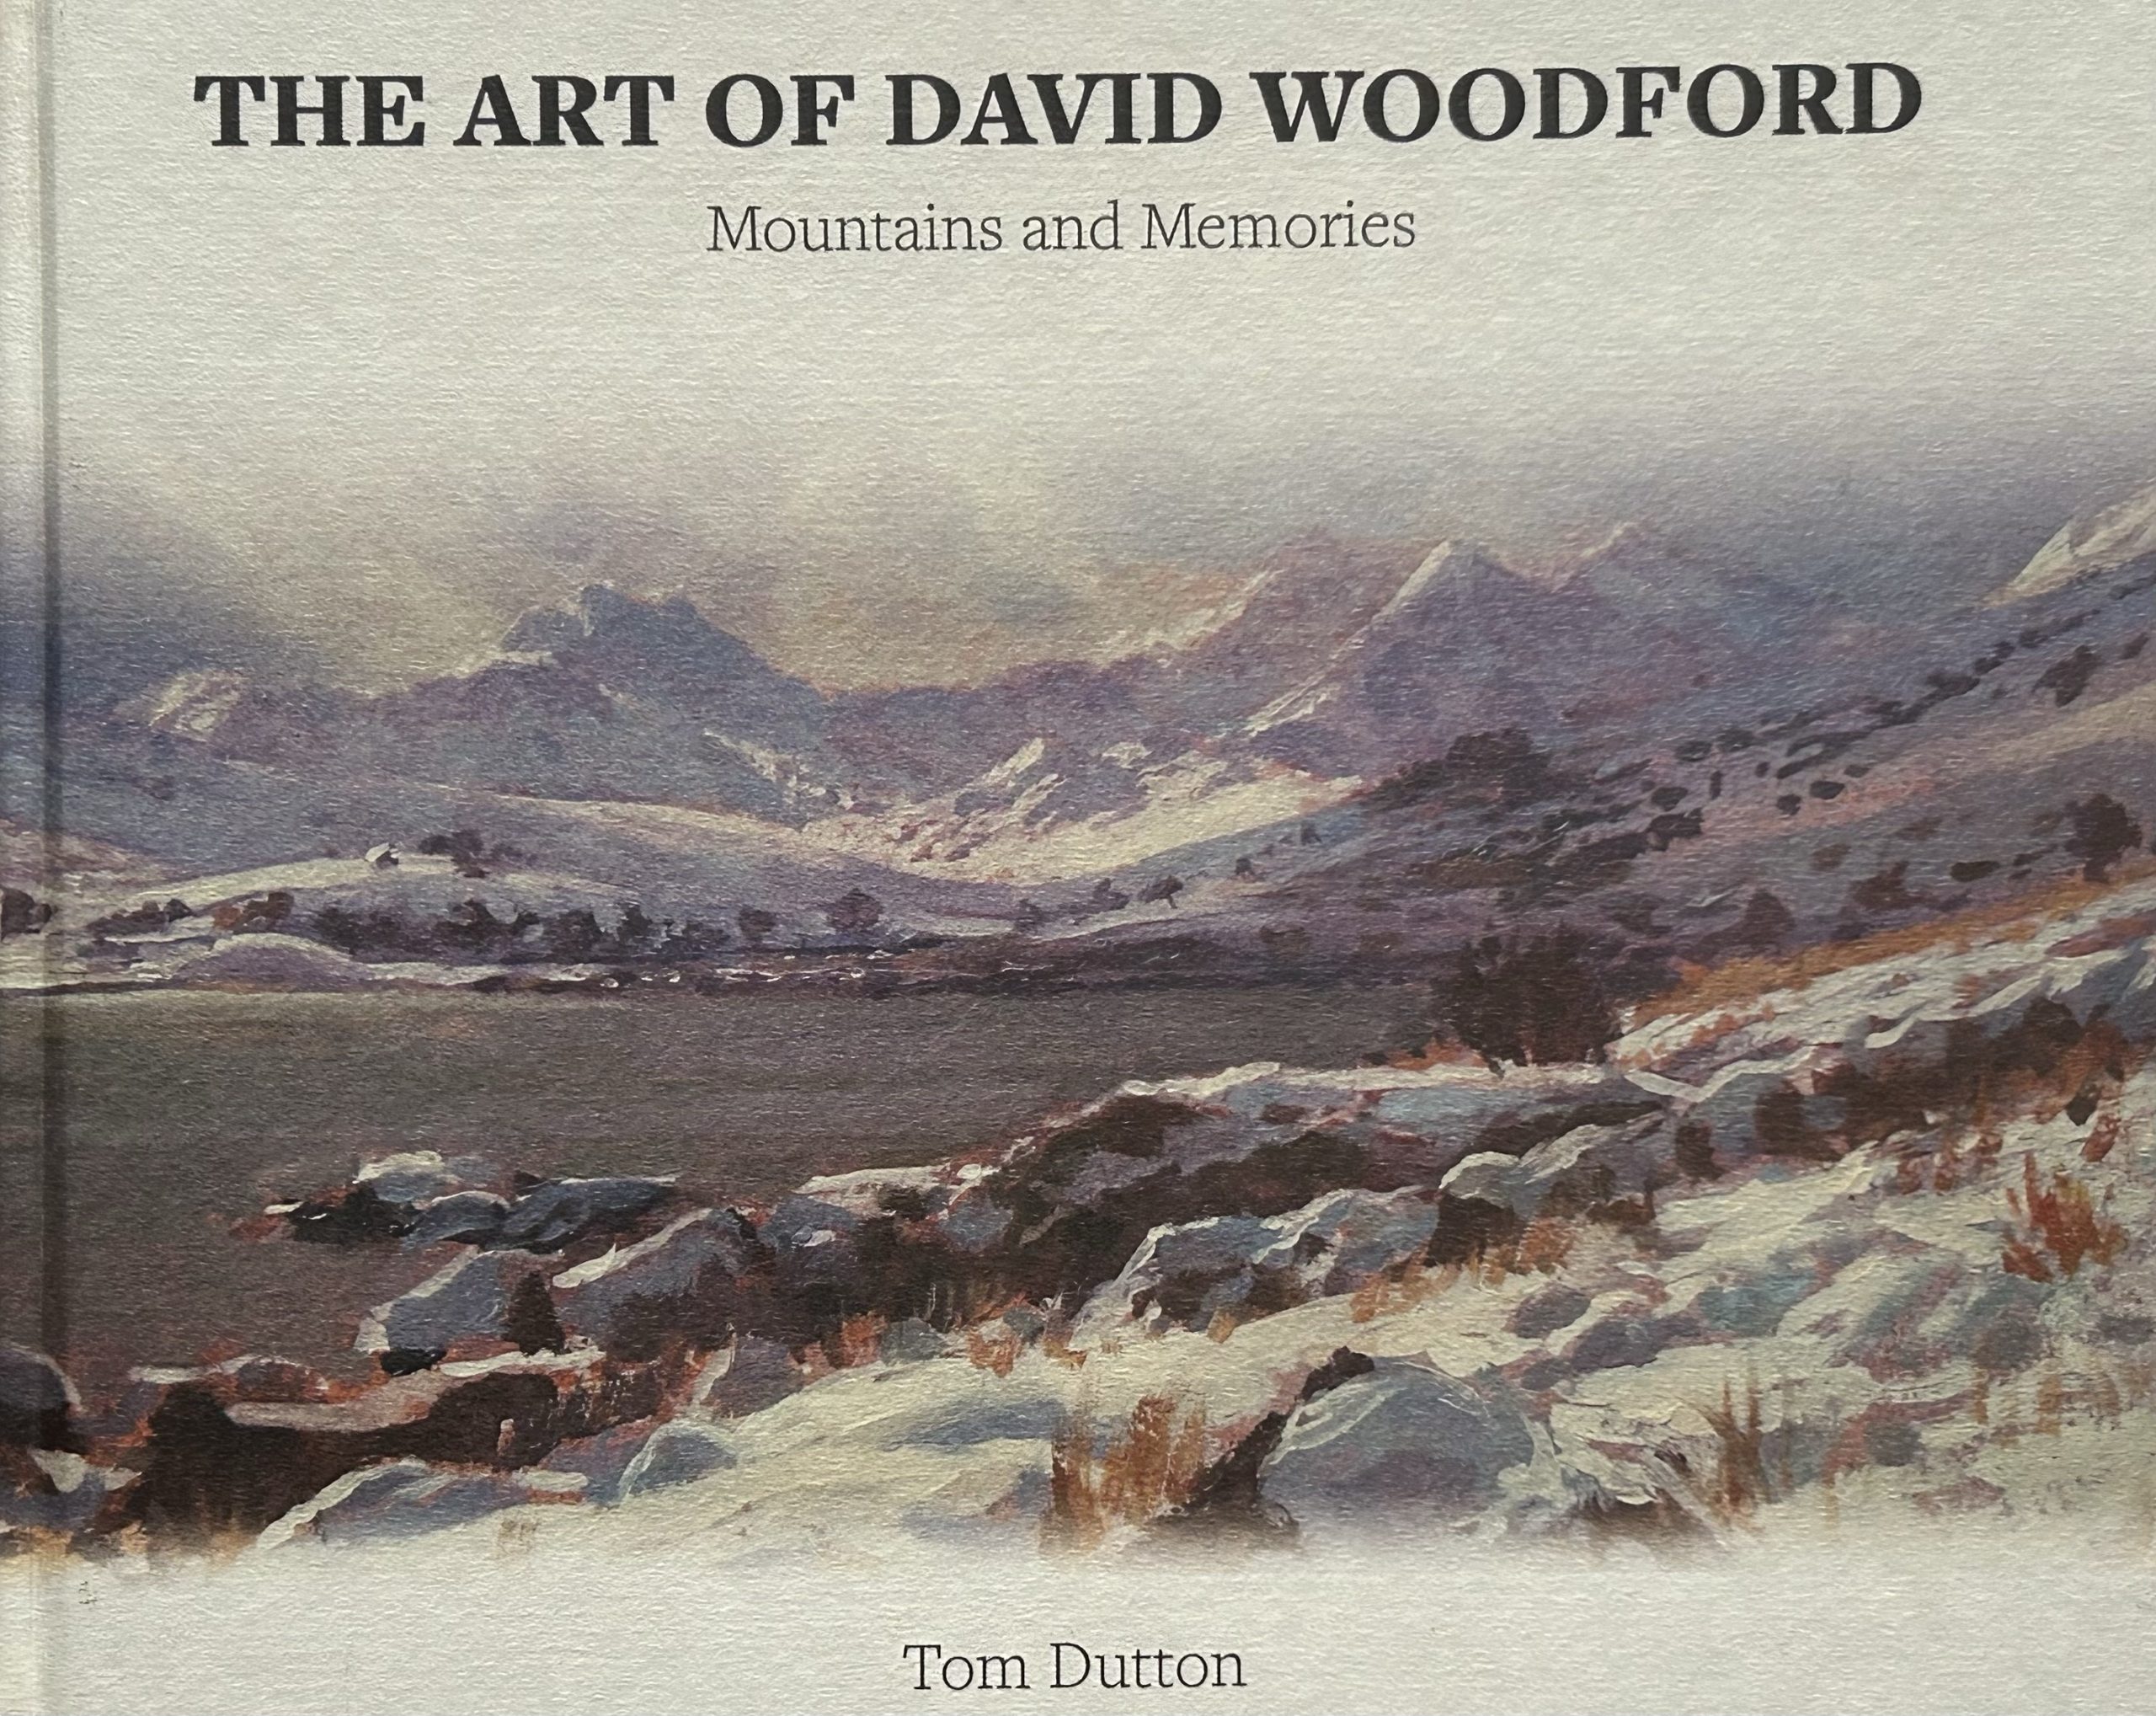 The Art of David Woodford: Mountains and Memories by Tom Dutton